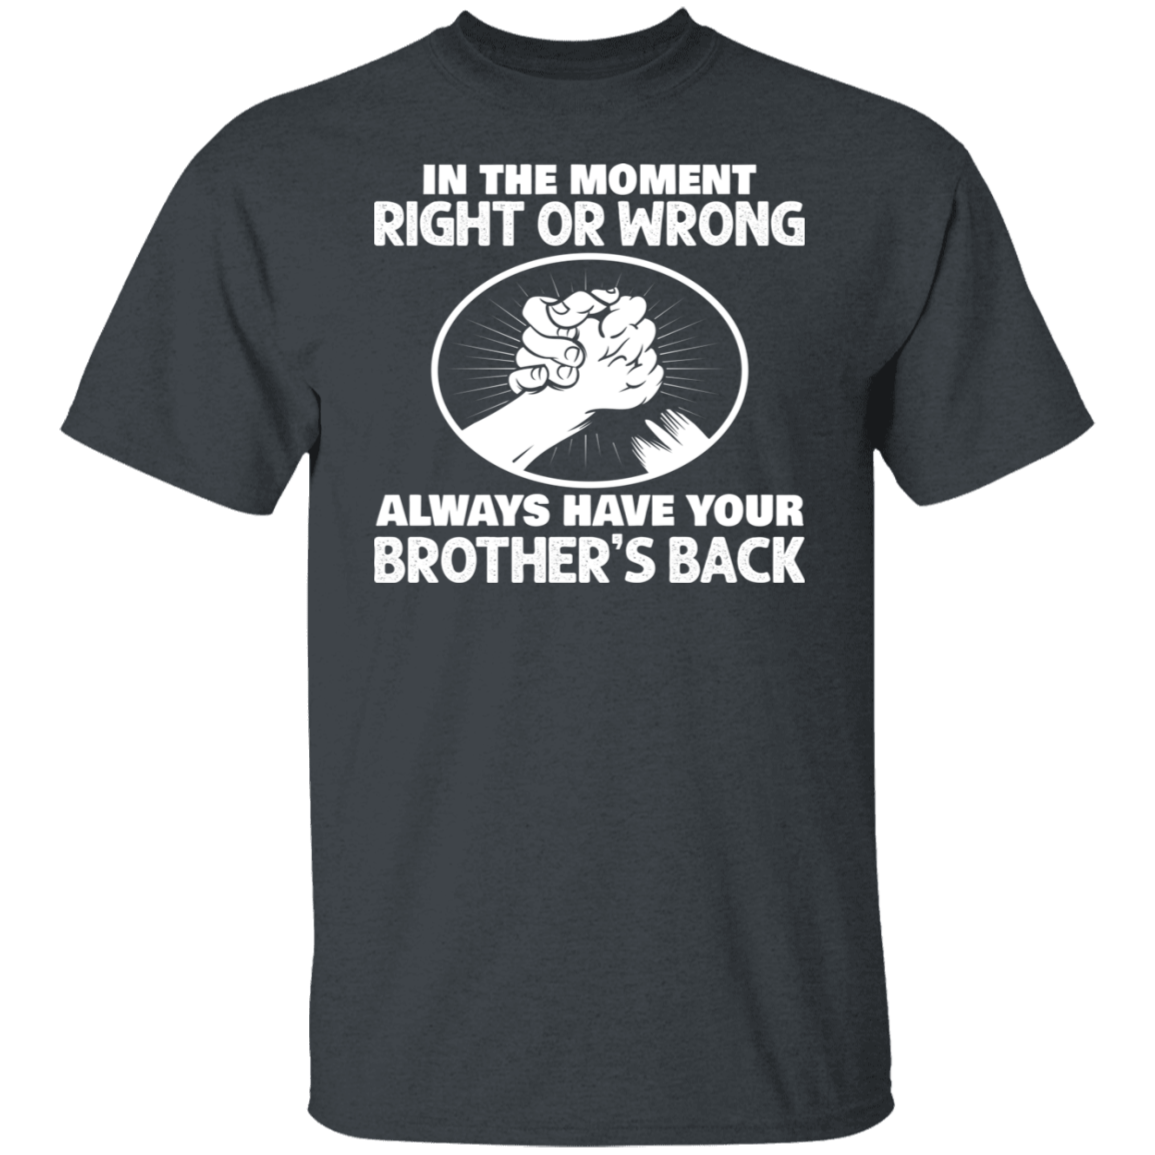 In the moment, right or wrong, always have your brother’s back Biker Shirt